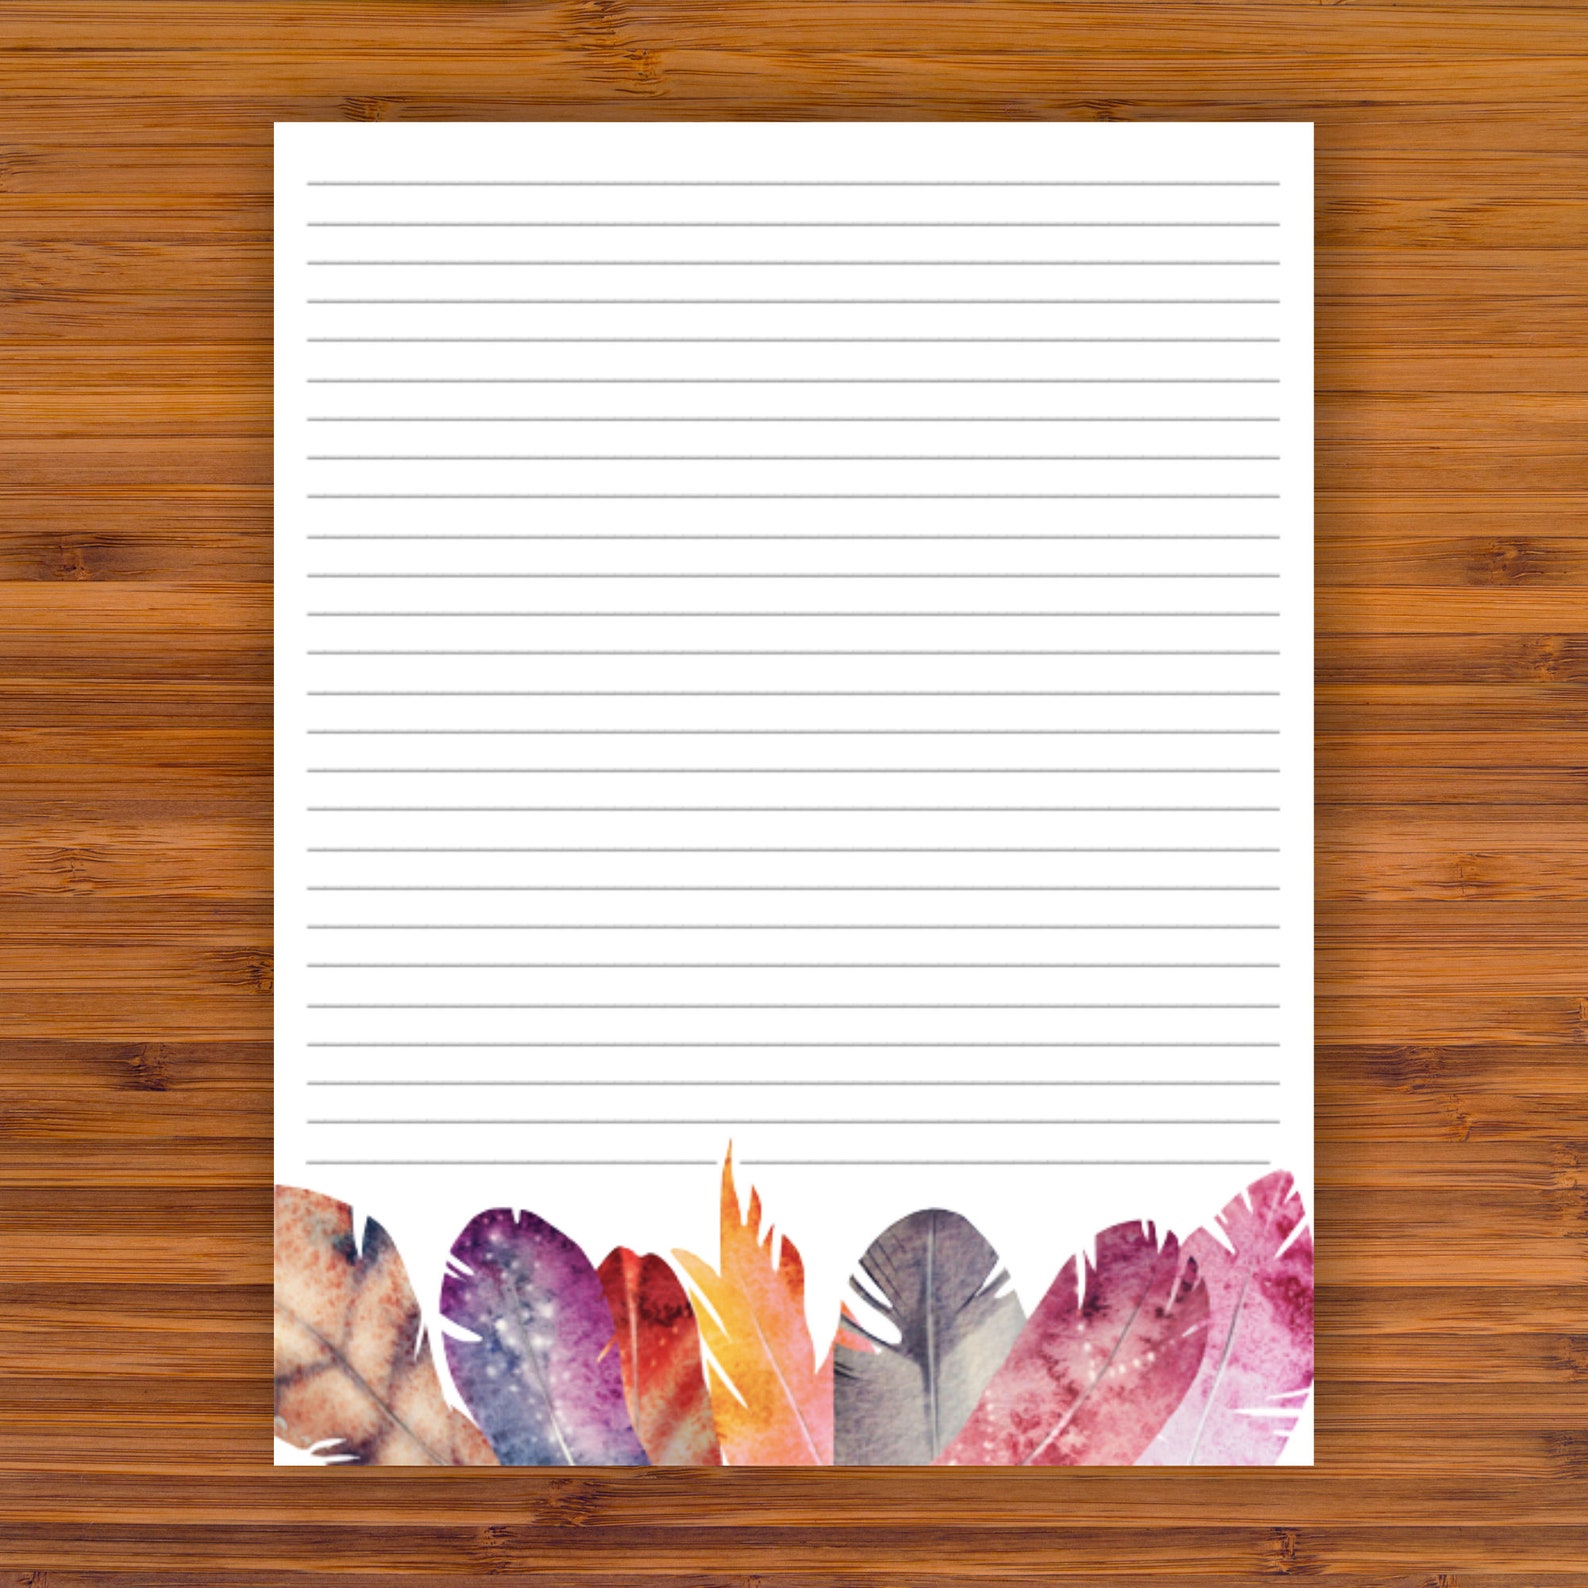 Printable Lined Writing Paper Colorful Feathers A4 8.5x11 Etsy